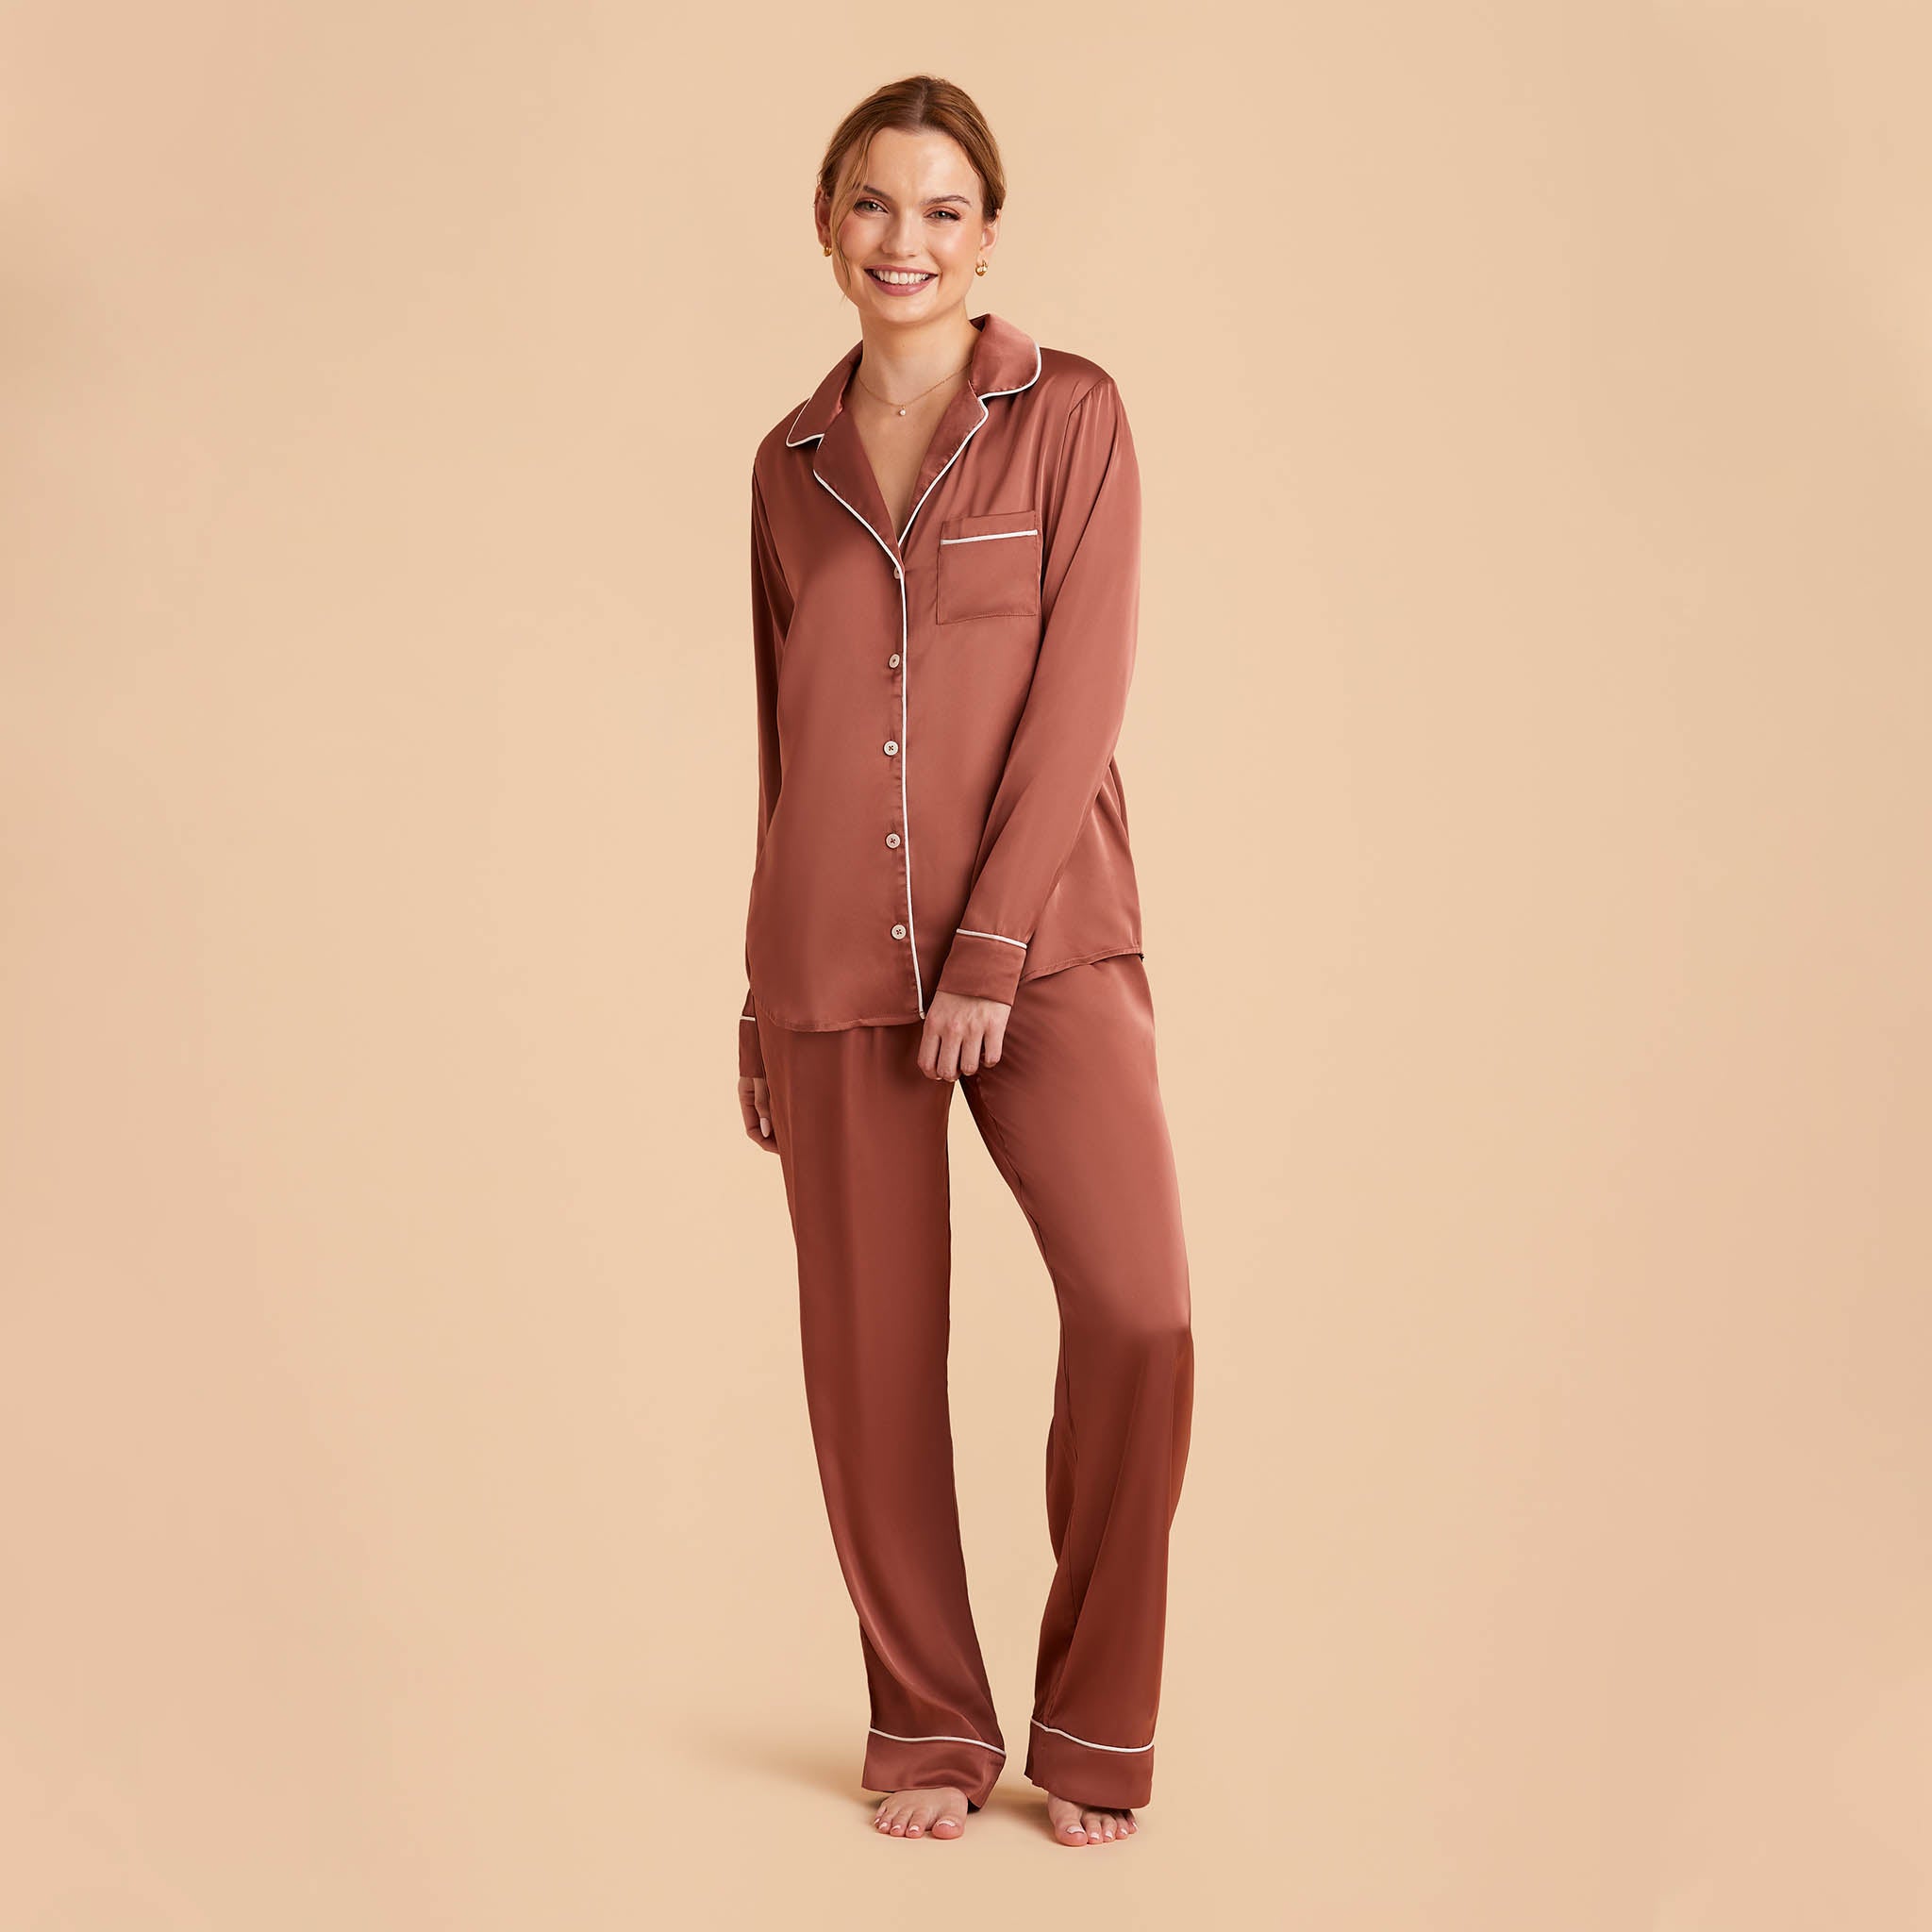 Jonny Satin Pants Bridesmaid Pajamas With White Piping in desert rose, front view